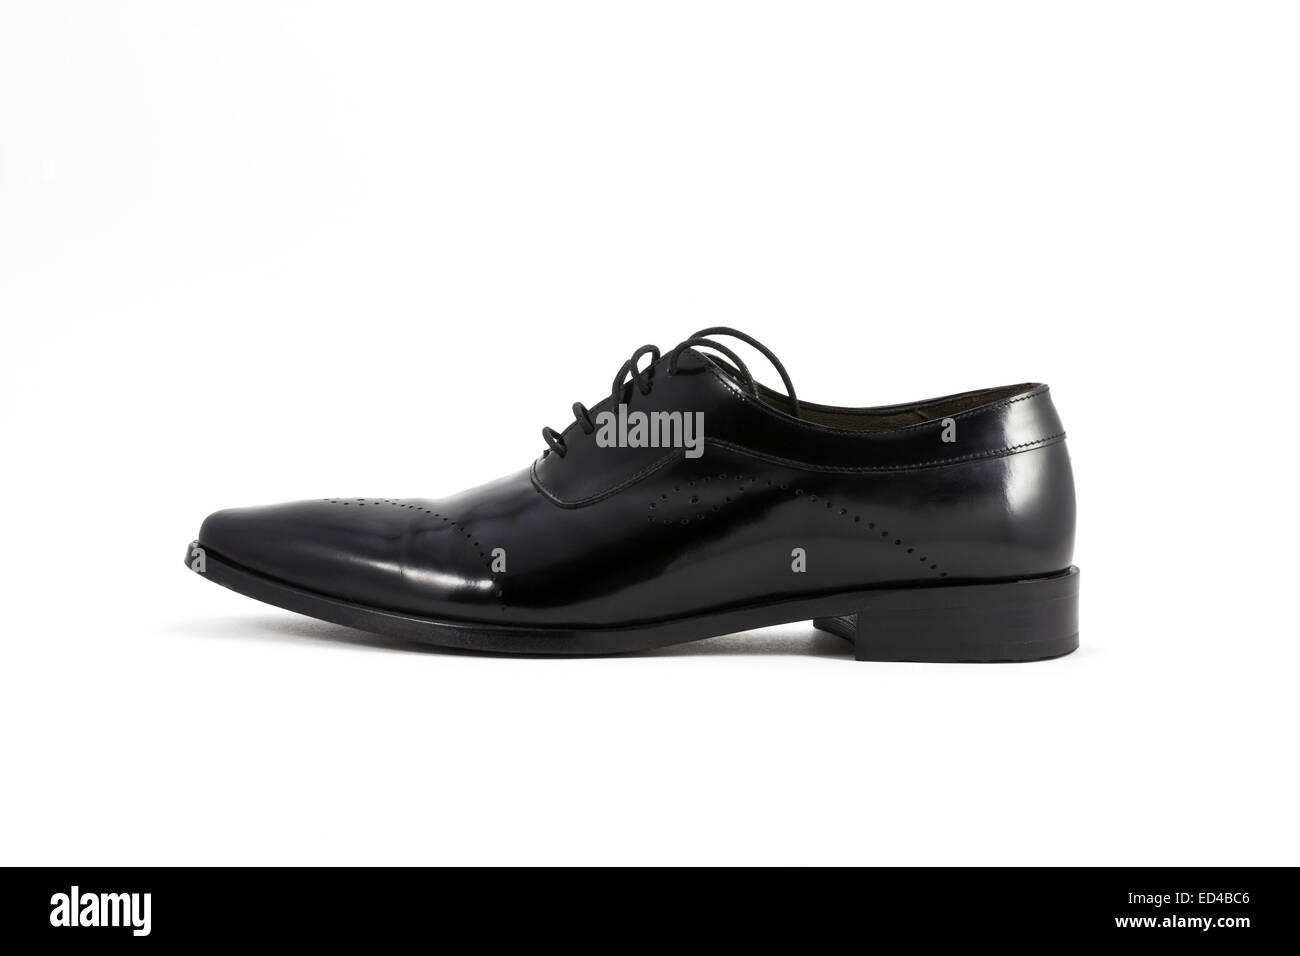 classic shoes for men Stock Photo - Alamy